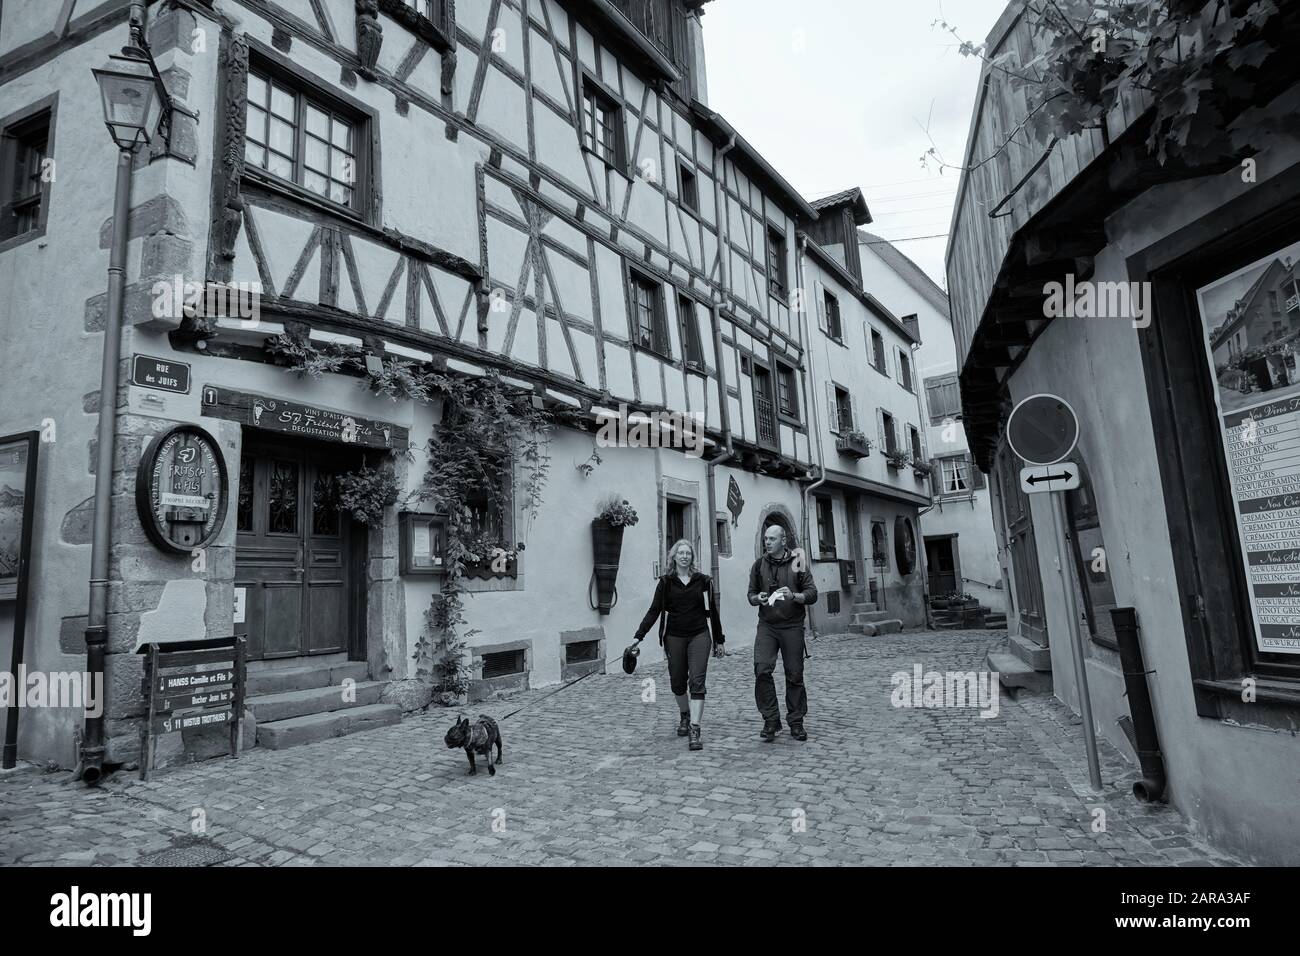 Couple walking dog, Cobbled Street, Riquewihr, Alsace, France, Europe Stock Photo